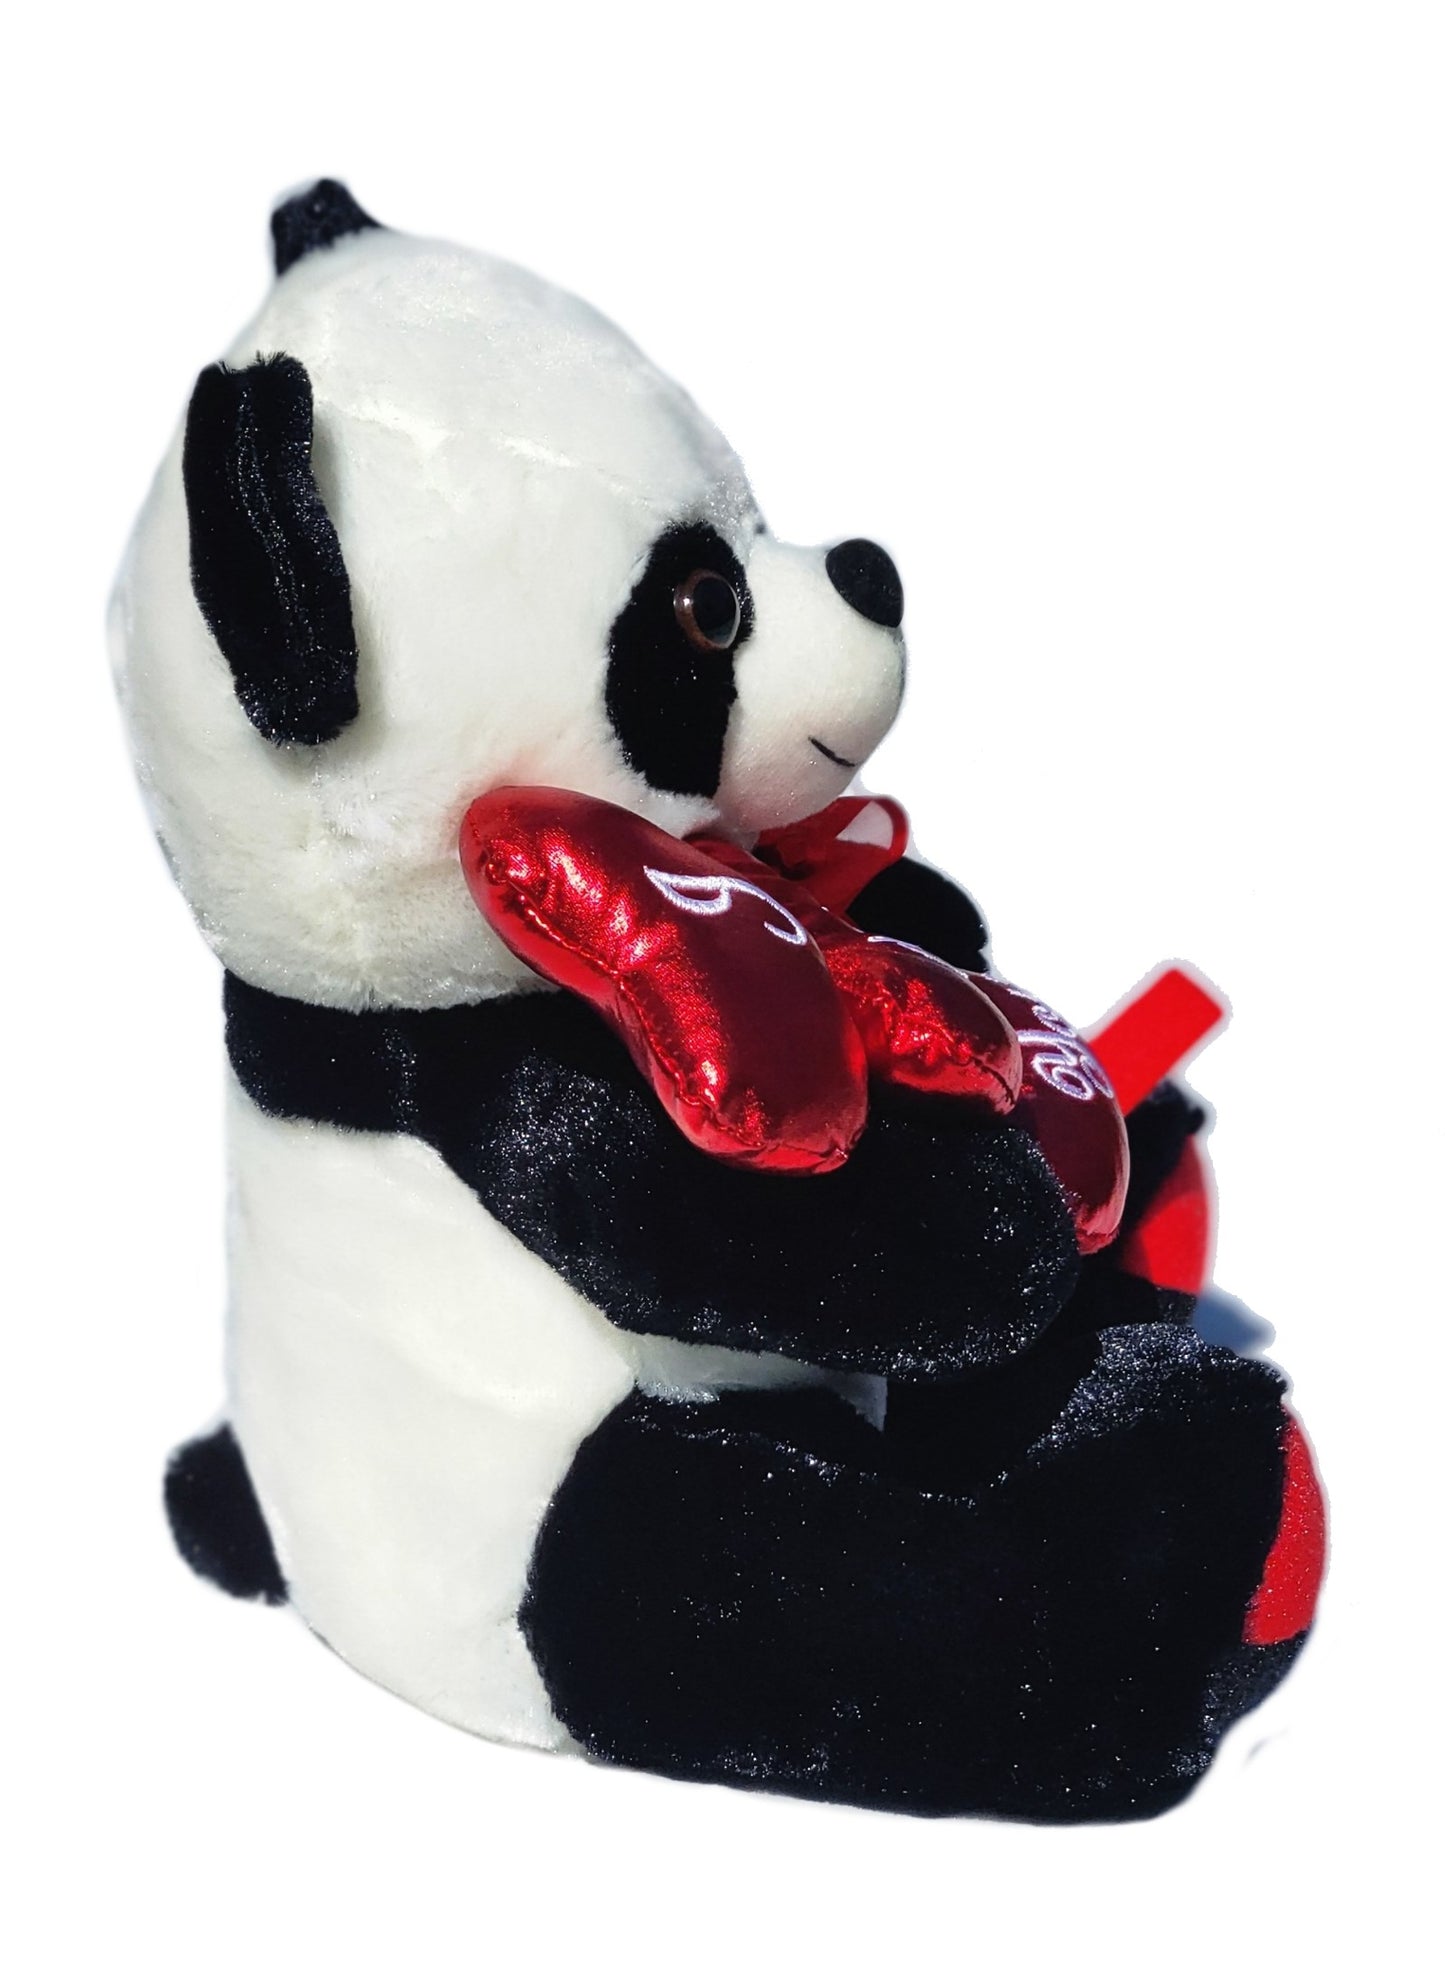 Panda Bear Holding I Love You Heart Bouquet 12 inch Valentine's Day Gift & Home Decor